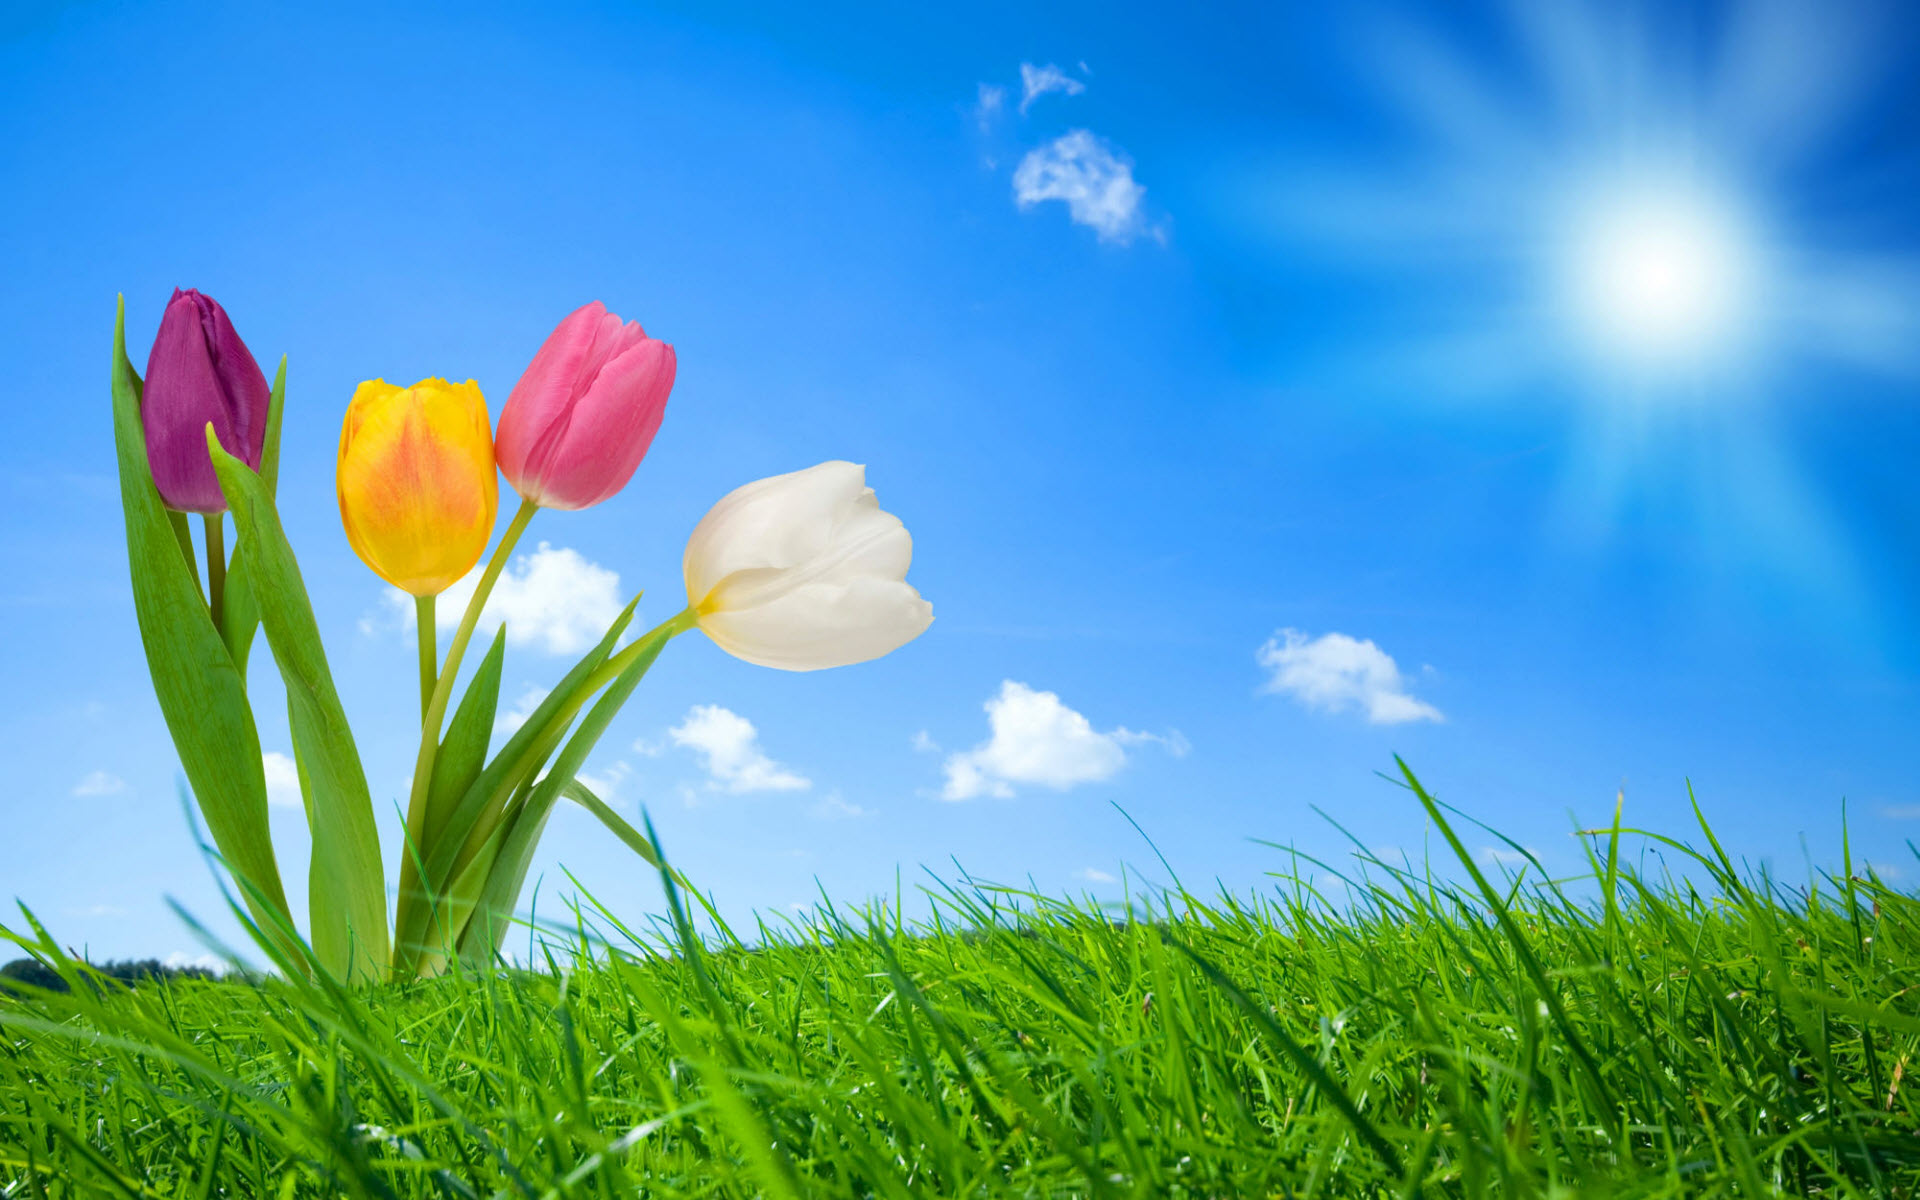 This High Quality Spring Nature Wallpaper For You Enjoy